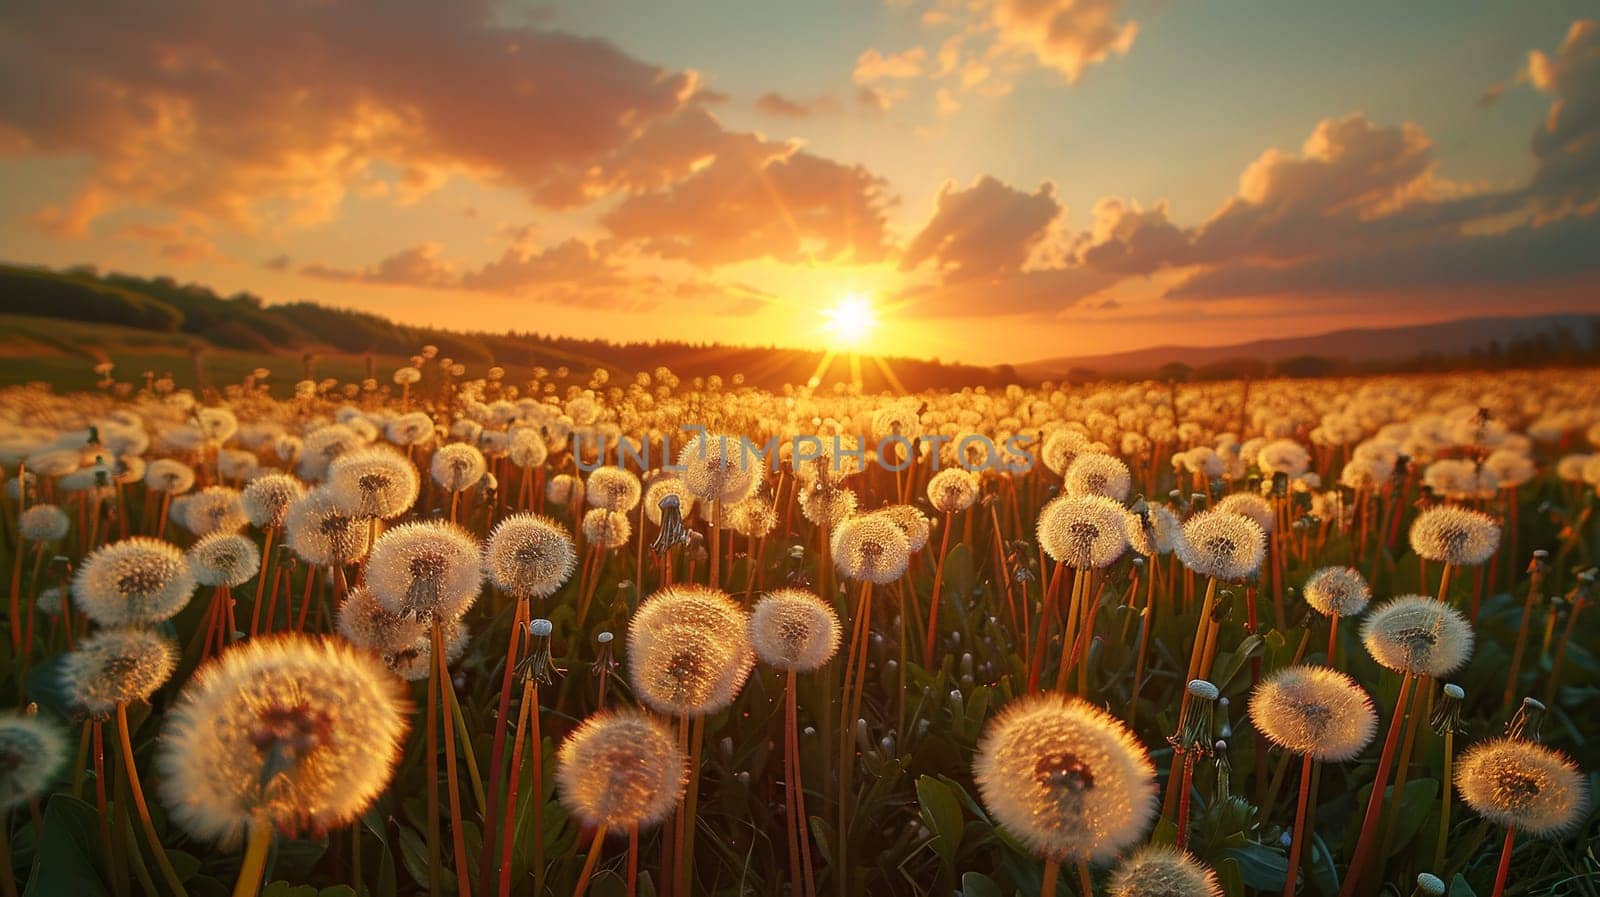 A field of dandelions is in full bloom, with the sun setting in the background by itchaznong